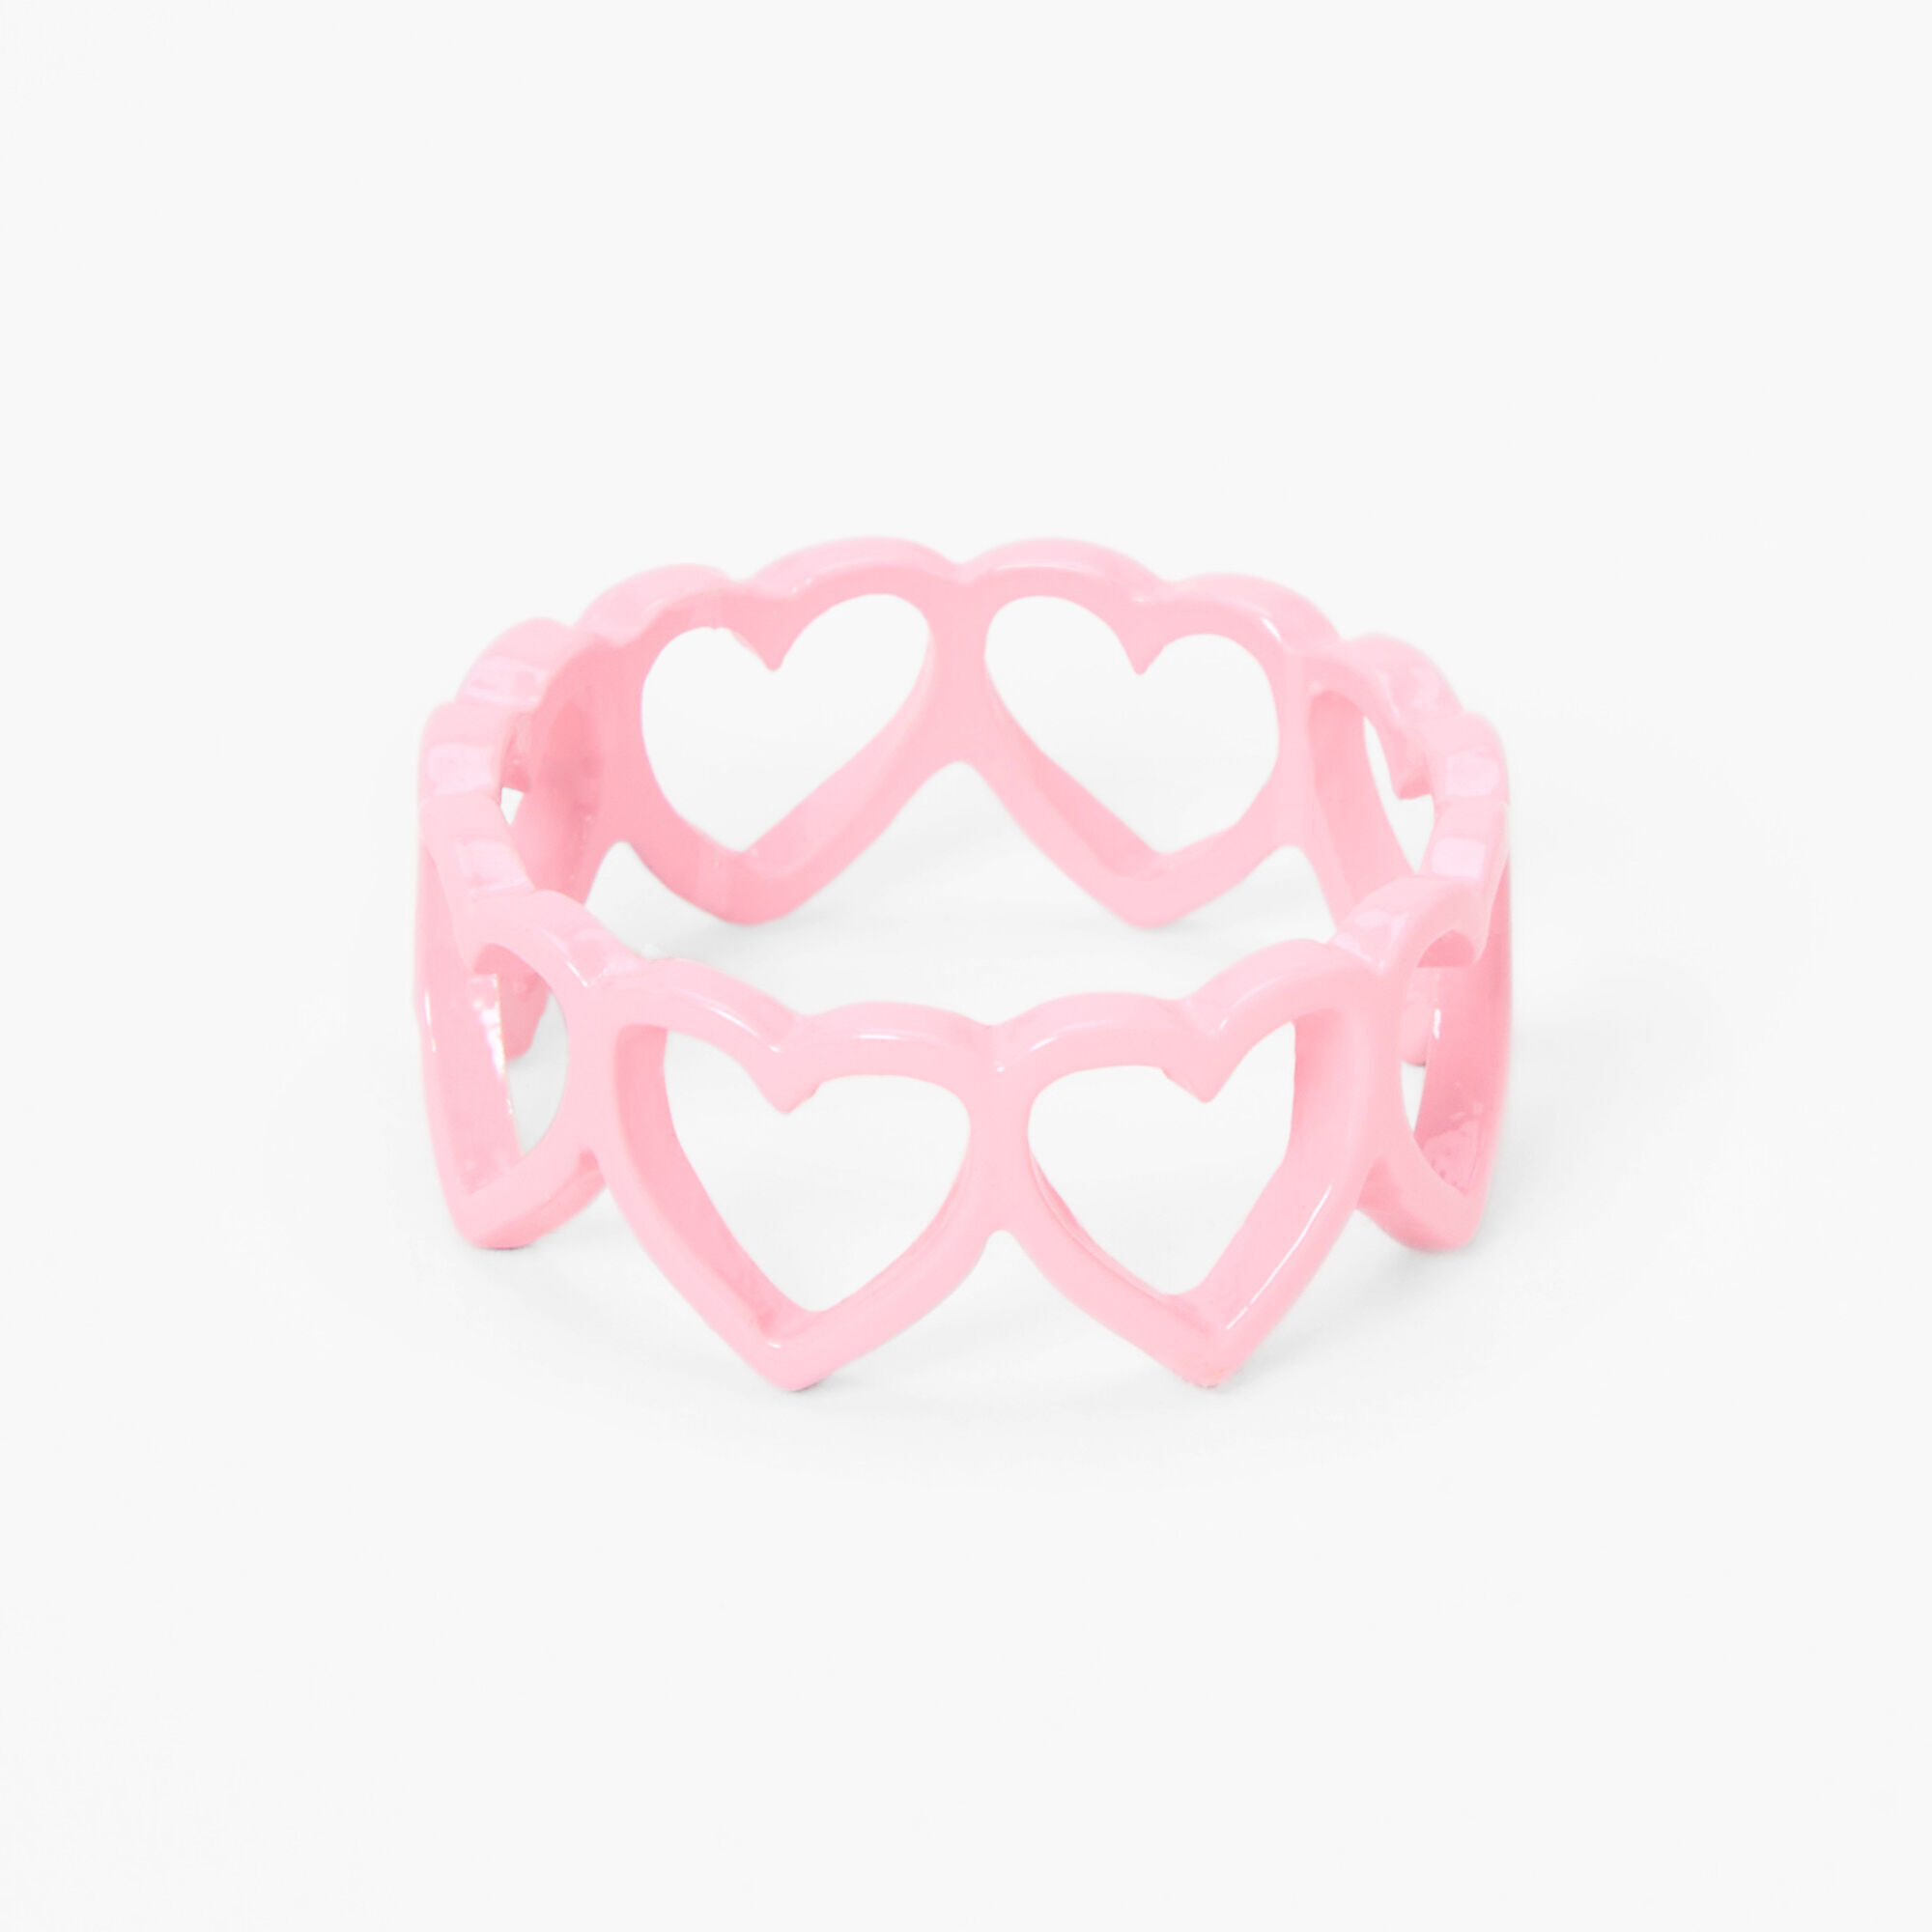 View Claires Heart Cutout Resin Ring Pink information